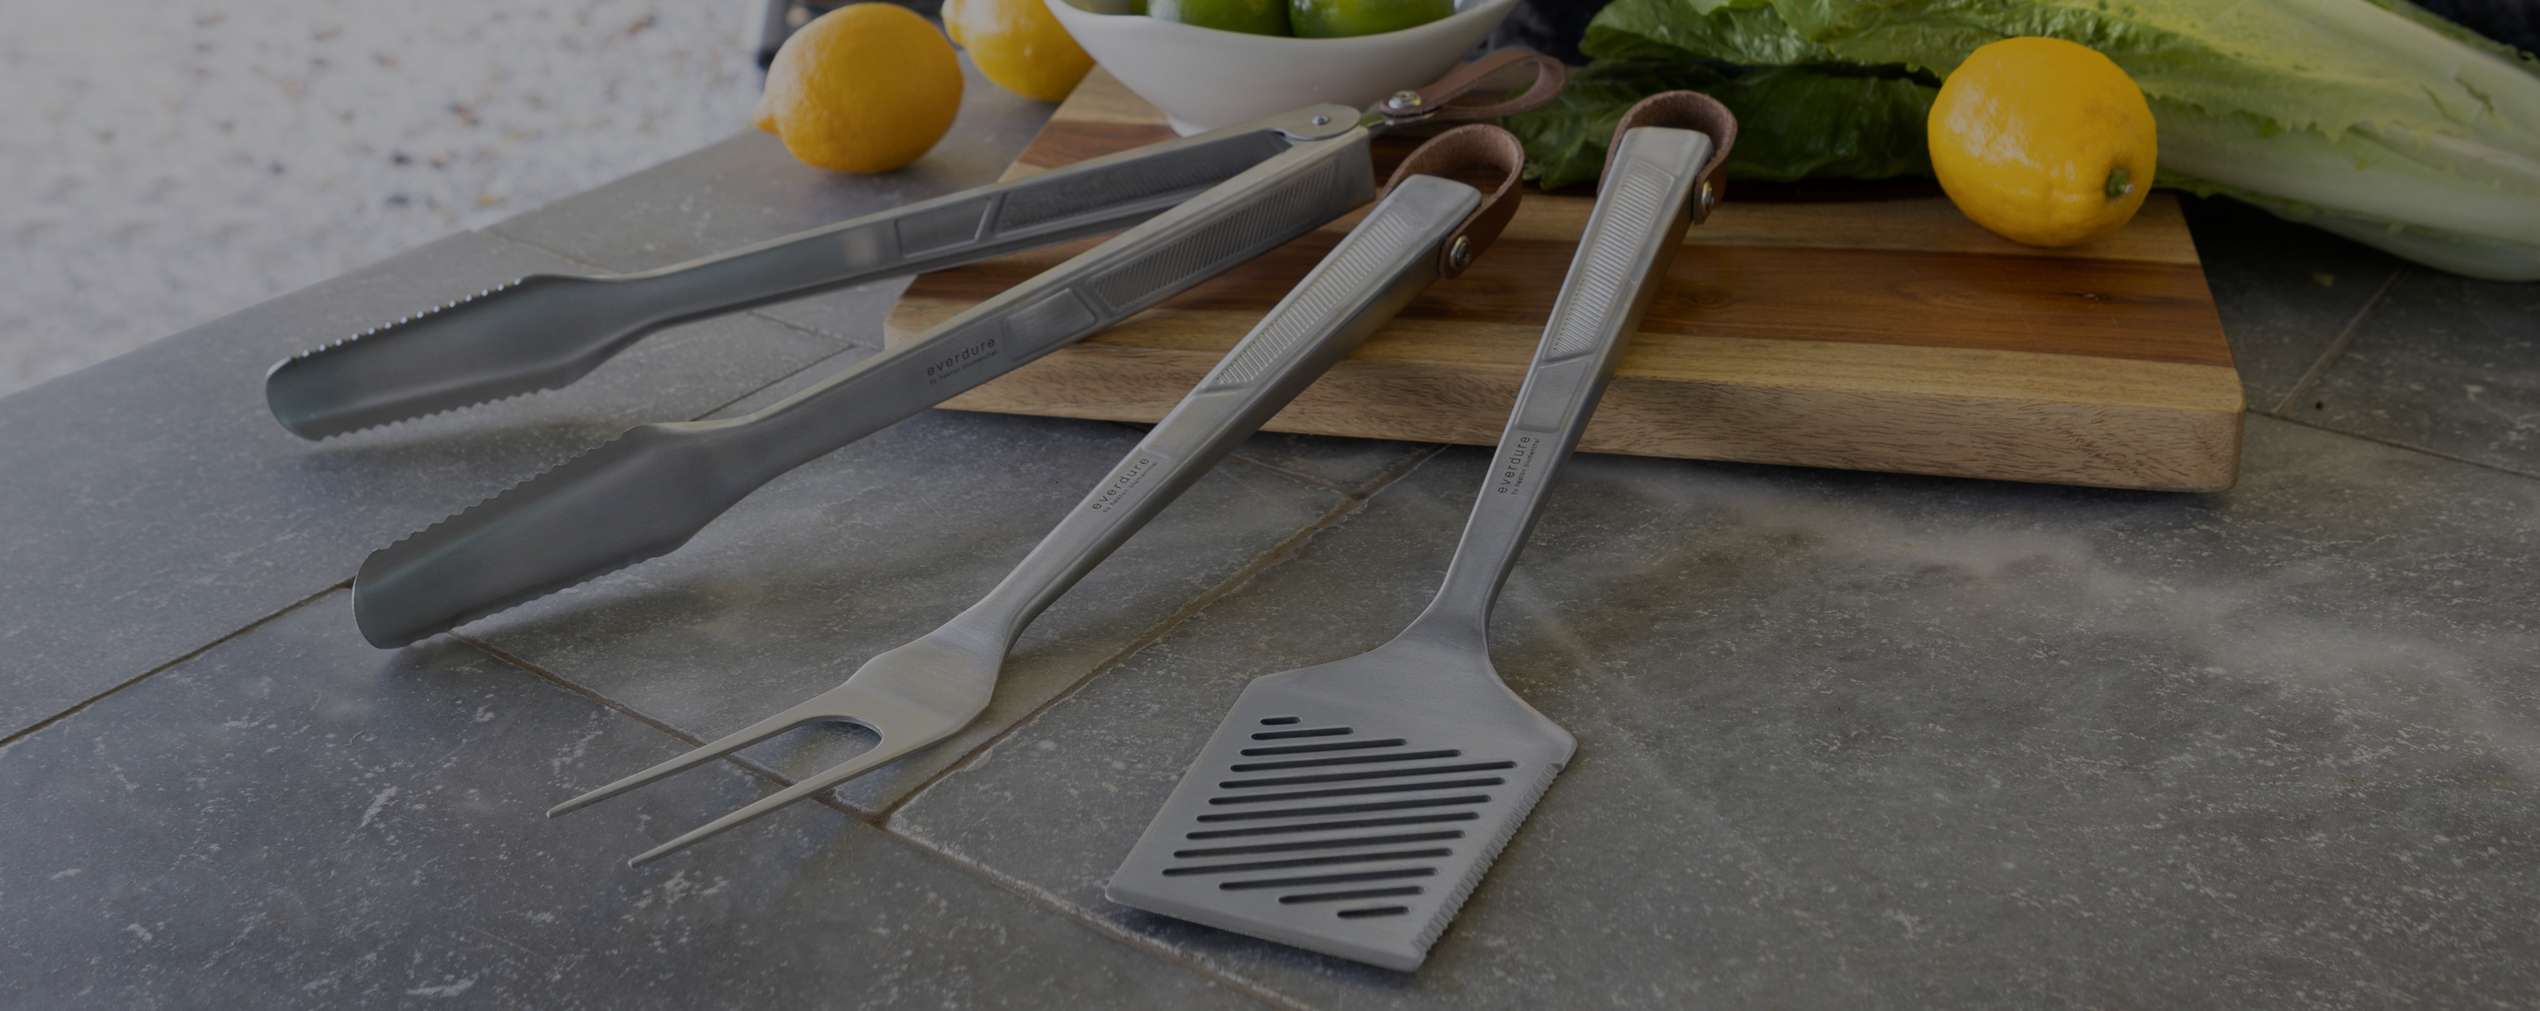 Quantum steel spatula fork and tongs on chopping board